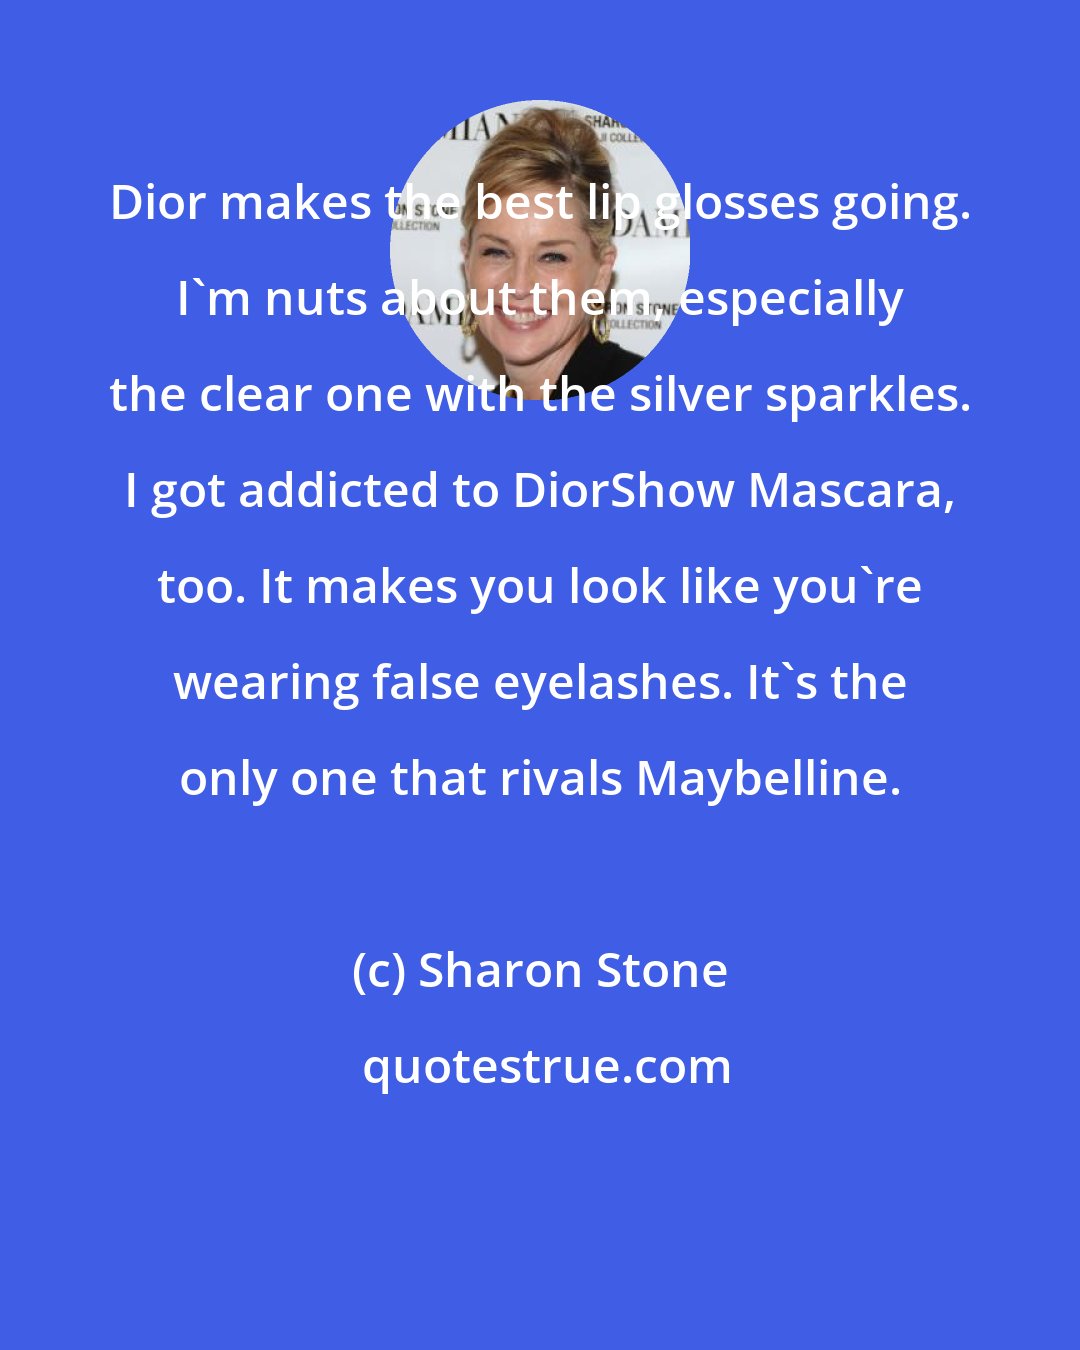 Sharon Stone: Dior makes the best lip glosses going. I'm nuts about them, especially the clear one with the silver sparkles. I got addicted to DiorShow Mascara, too. It makes you look like you're wearing false eyelashes. It's the only one that rivals Maybelline.